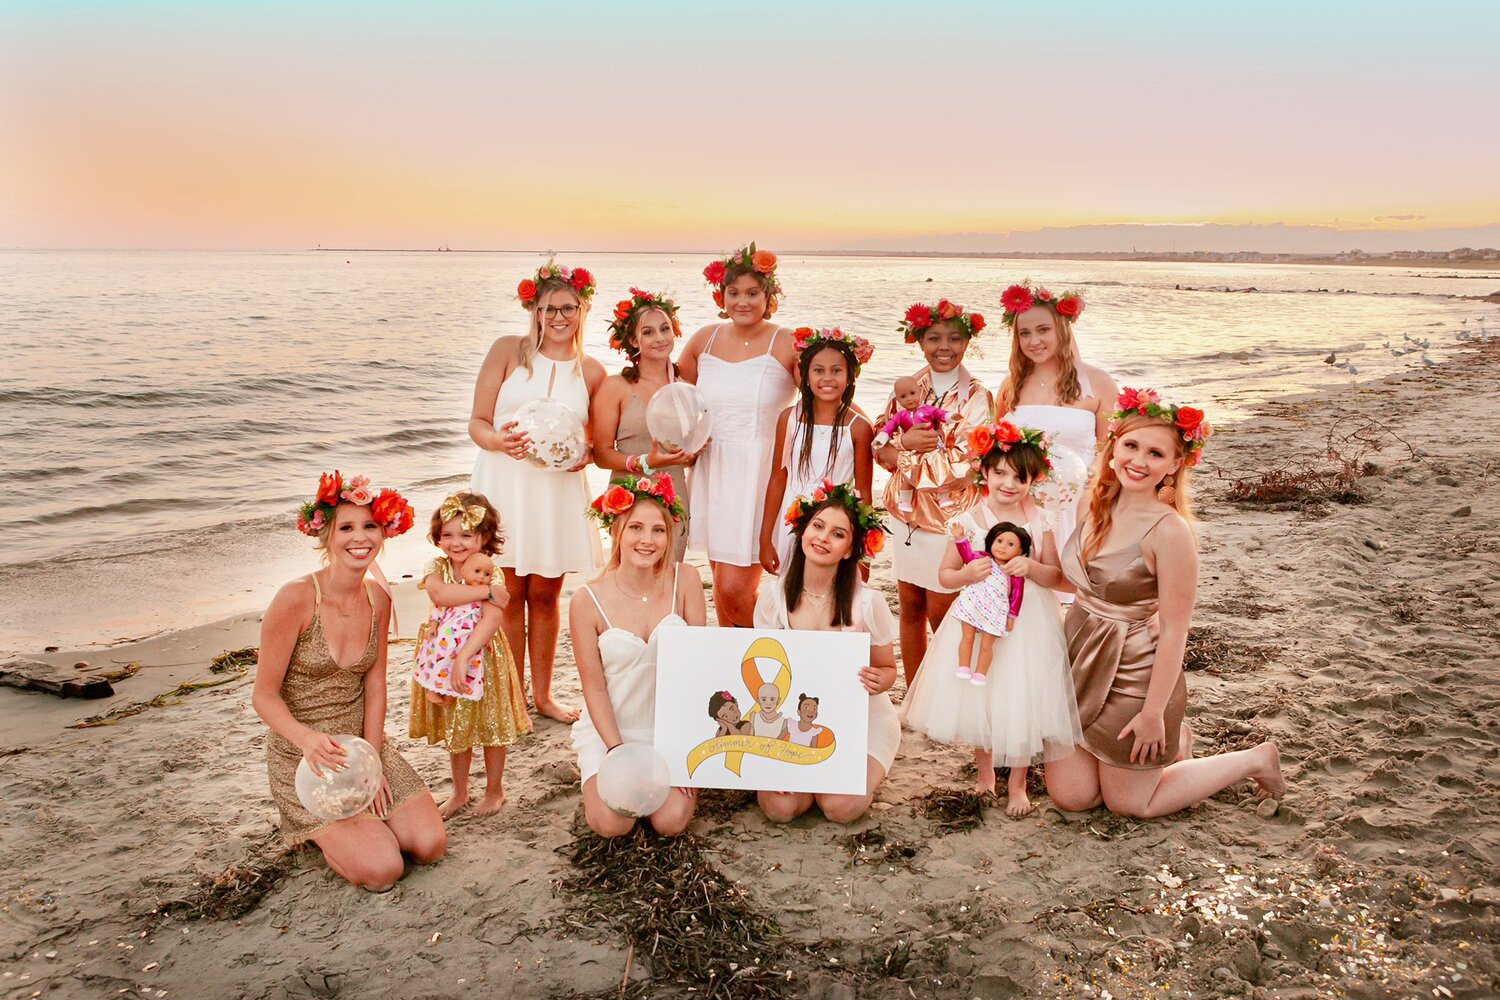 Image of Glimmer of Hope Foundation members at the beach during sunset. They are all girls and are wearing white and gold short dresses, as well as flower arrangements on their hair.